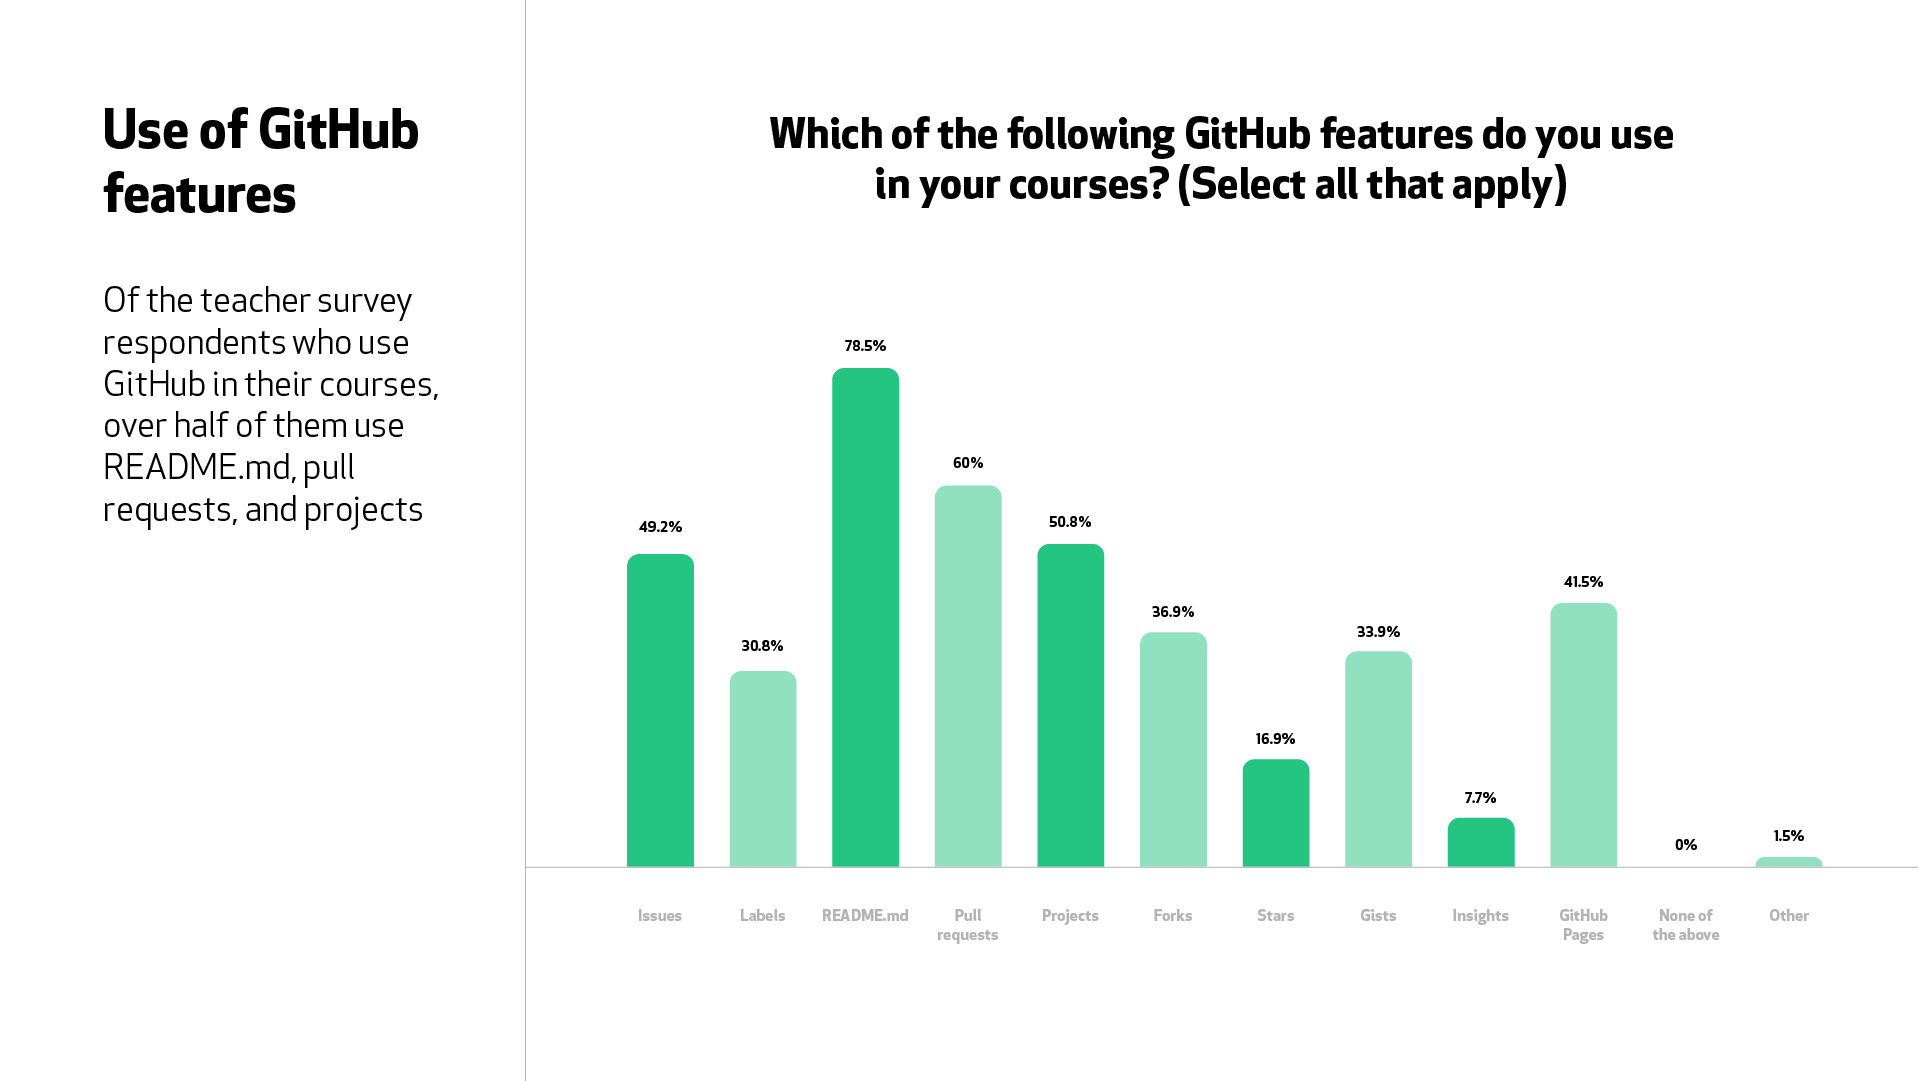 A graph for the question, “Which of the following GitHub features do you use in your courses?” 78.% of teachers use README.md files, 60% use pull requests, 50.8% use projects. Other features were used by less than 50% of respondents.